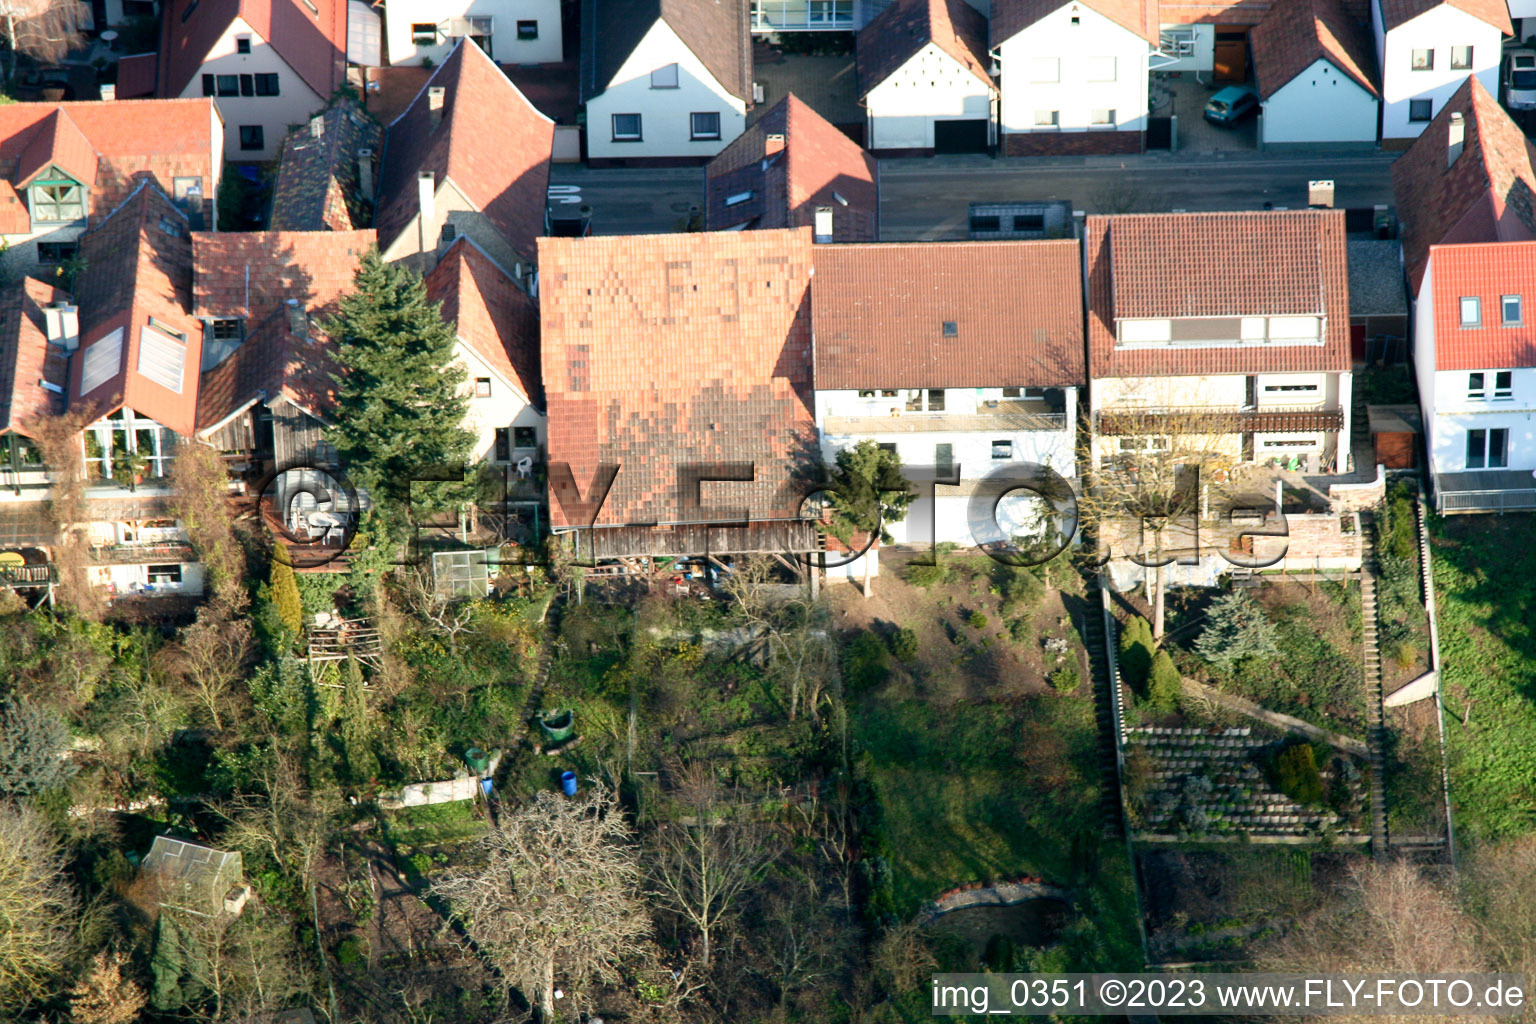 Ludwigstr in Jockgrim in the state Rhineland-Palatinate, Germany from above